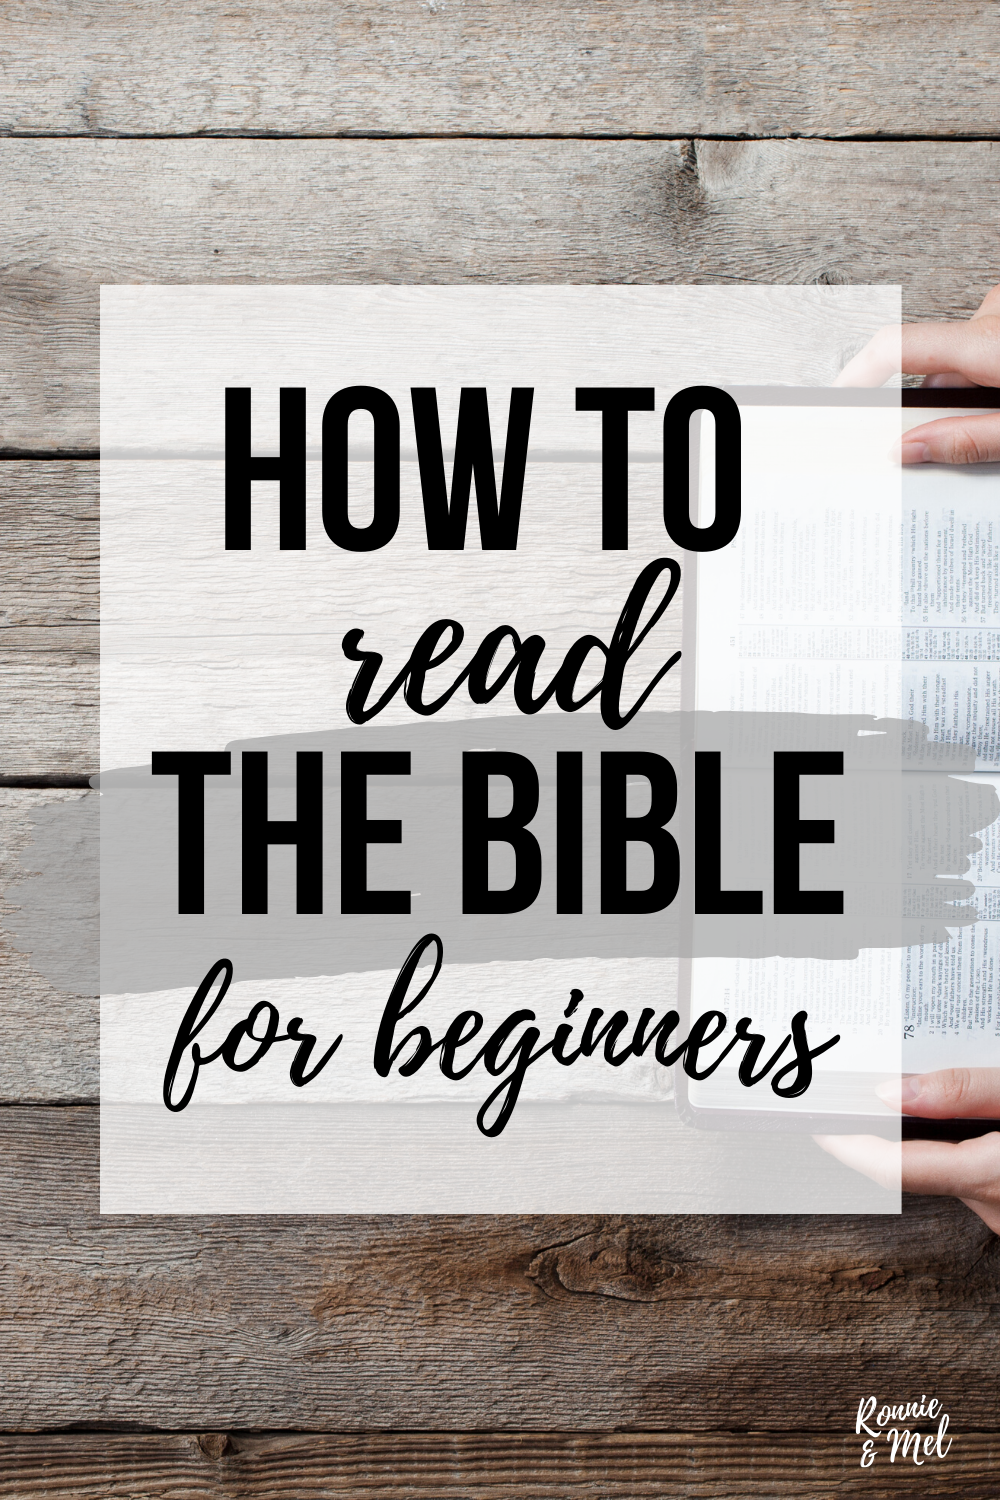 how to read the Bible for beginners, bible how to, bible study how to, how to read the Bible, how to understand the Bible, bible for beginners, Jesus, god, christian, christianity, bible, reading the Bible, reading the Bible for the first time, gods word, scripture,